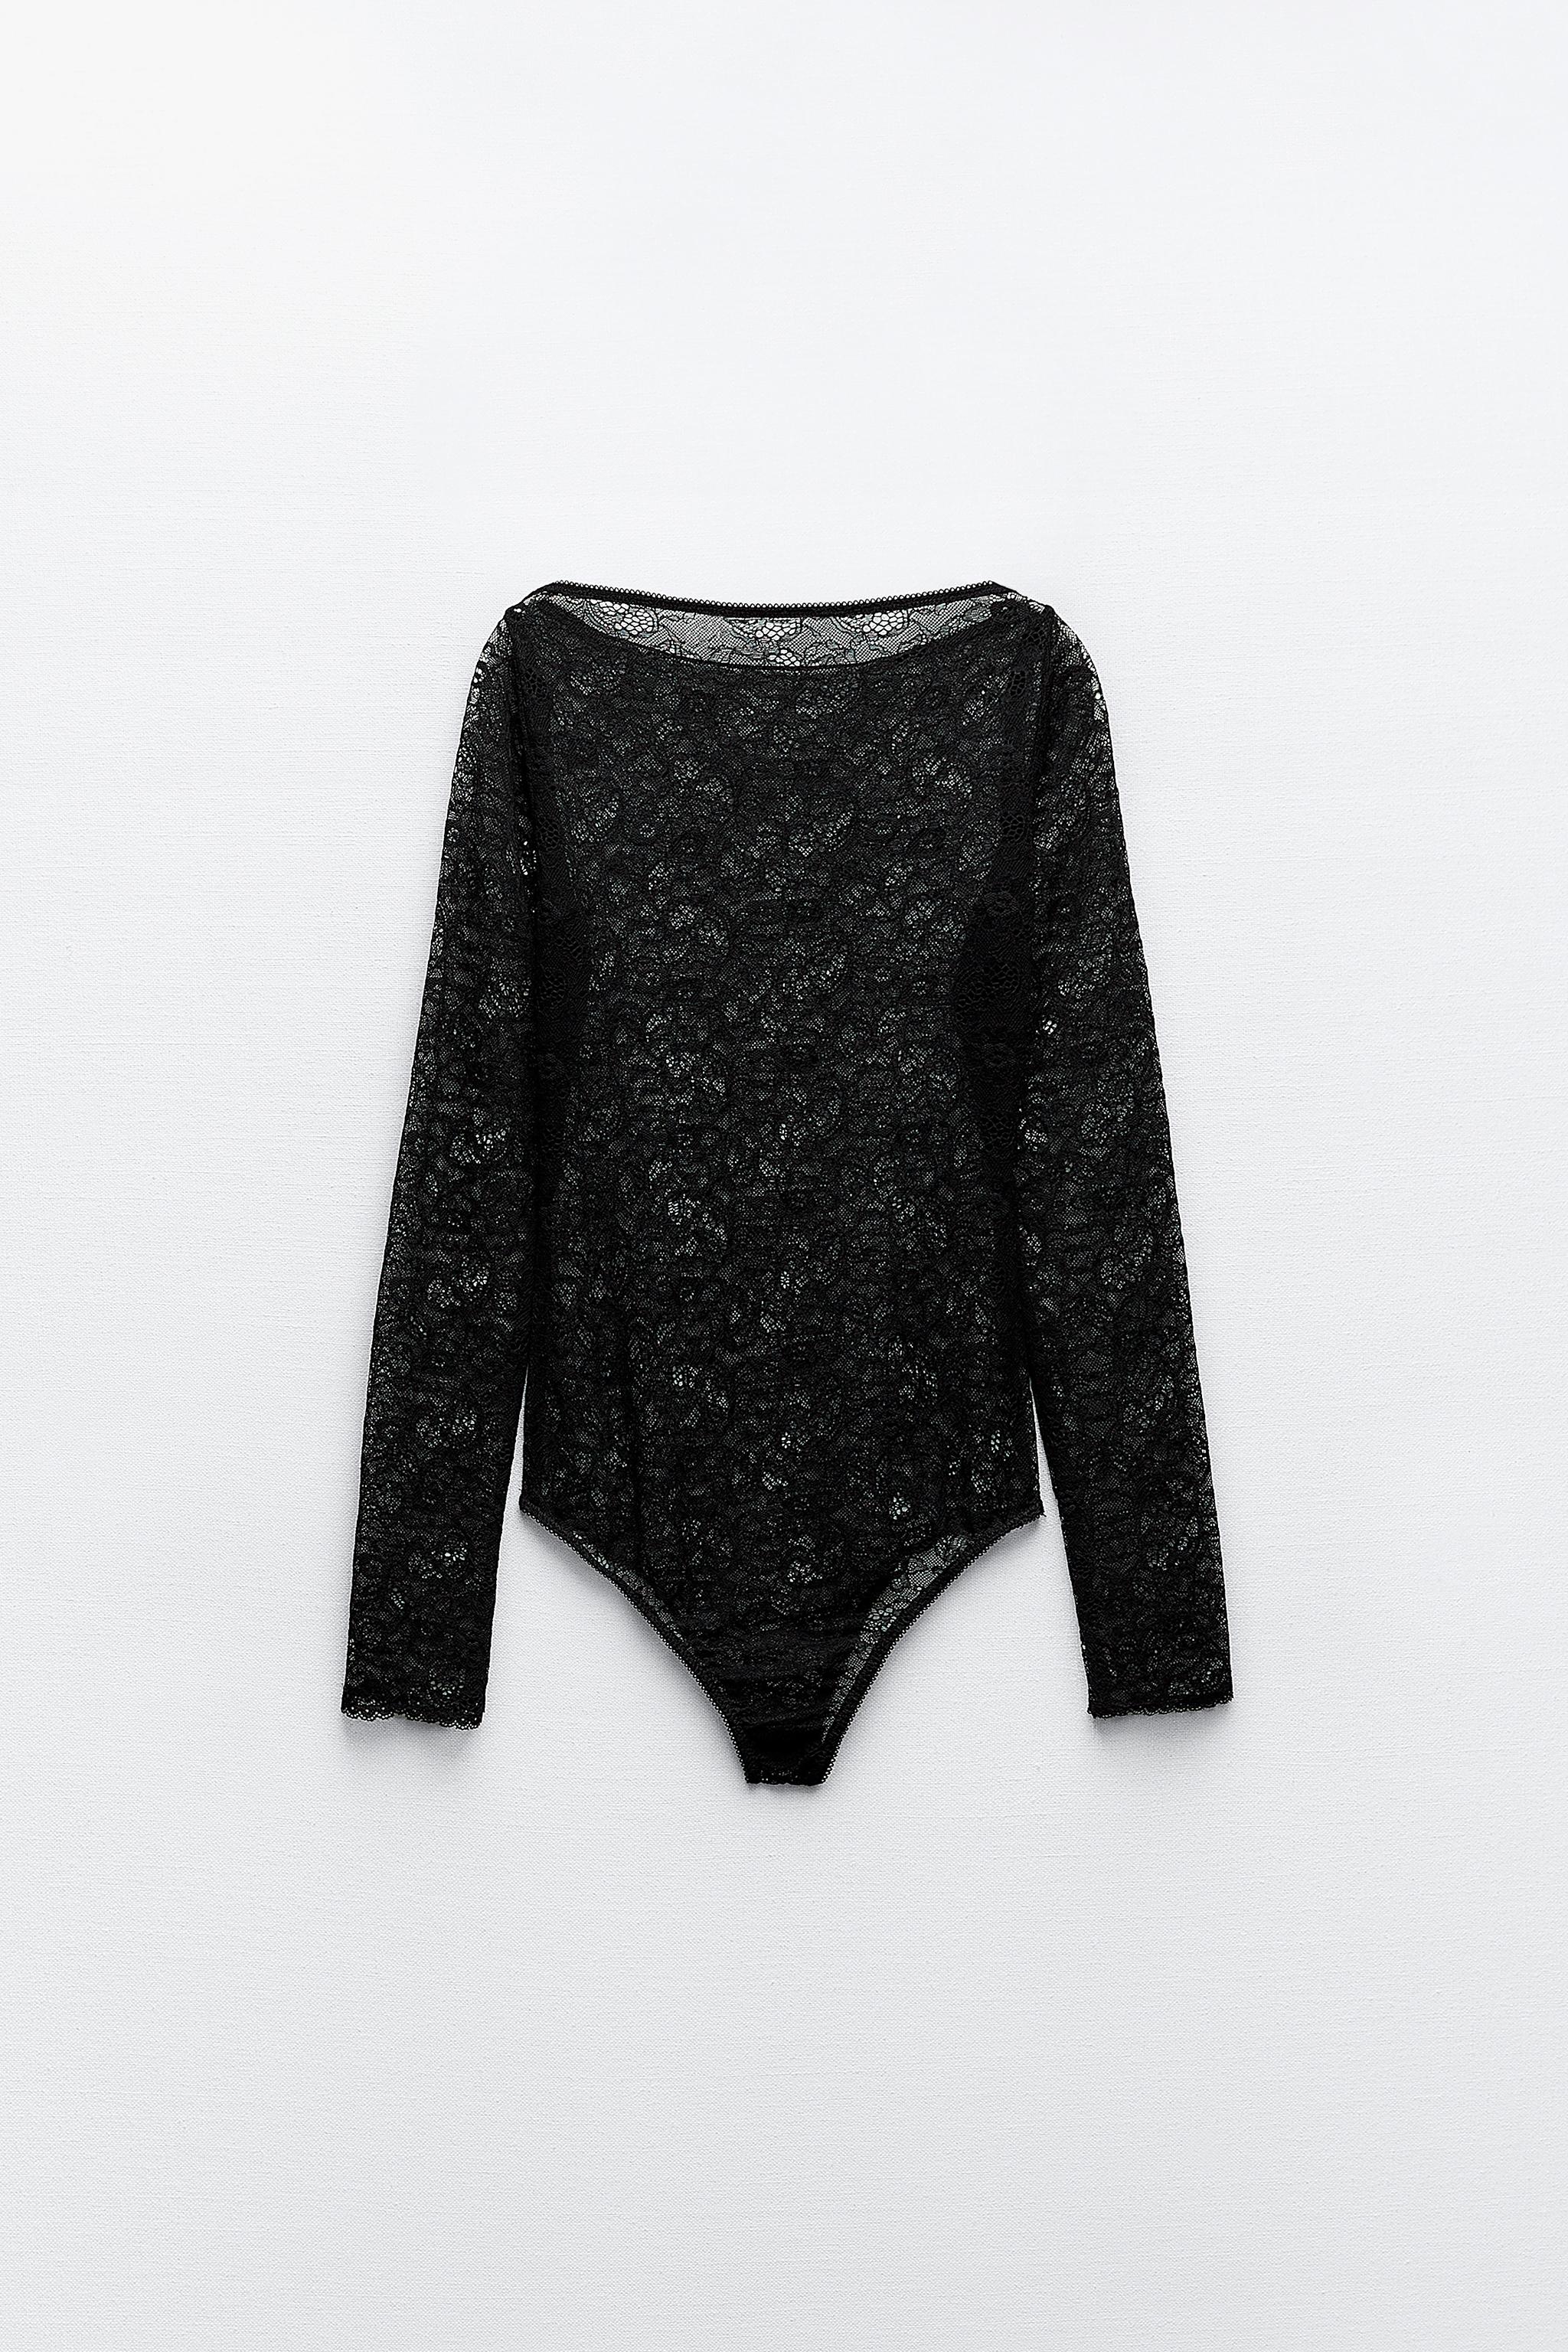 ZARA on X: A lace bodysuit will dress up your look